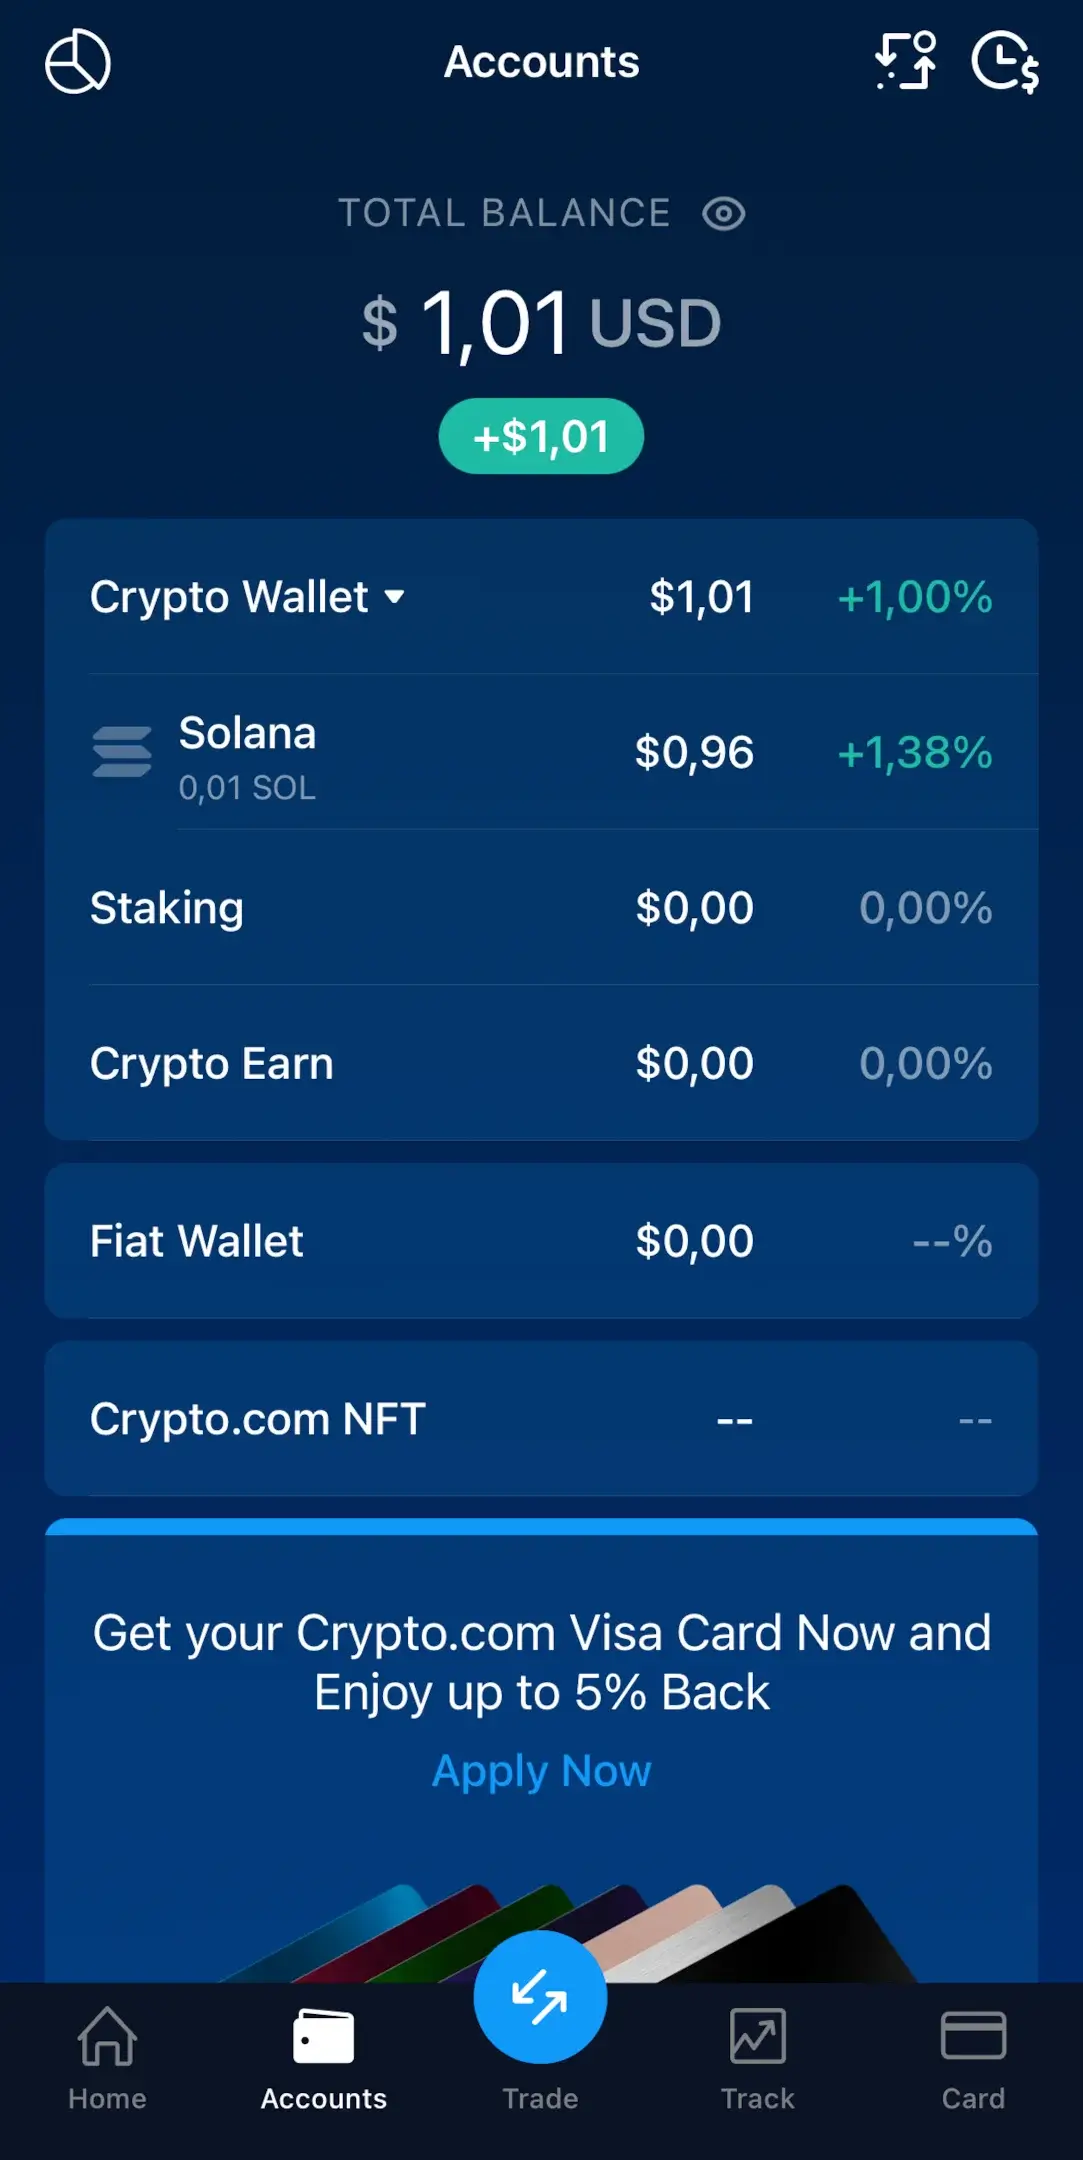 Step 2: Go to "Accounts" and Select the Crypto You Want to Withdraw